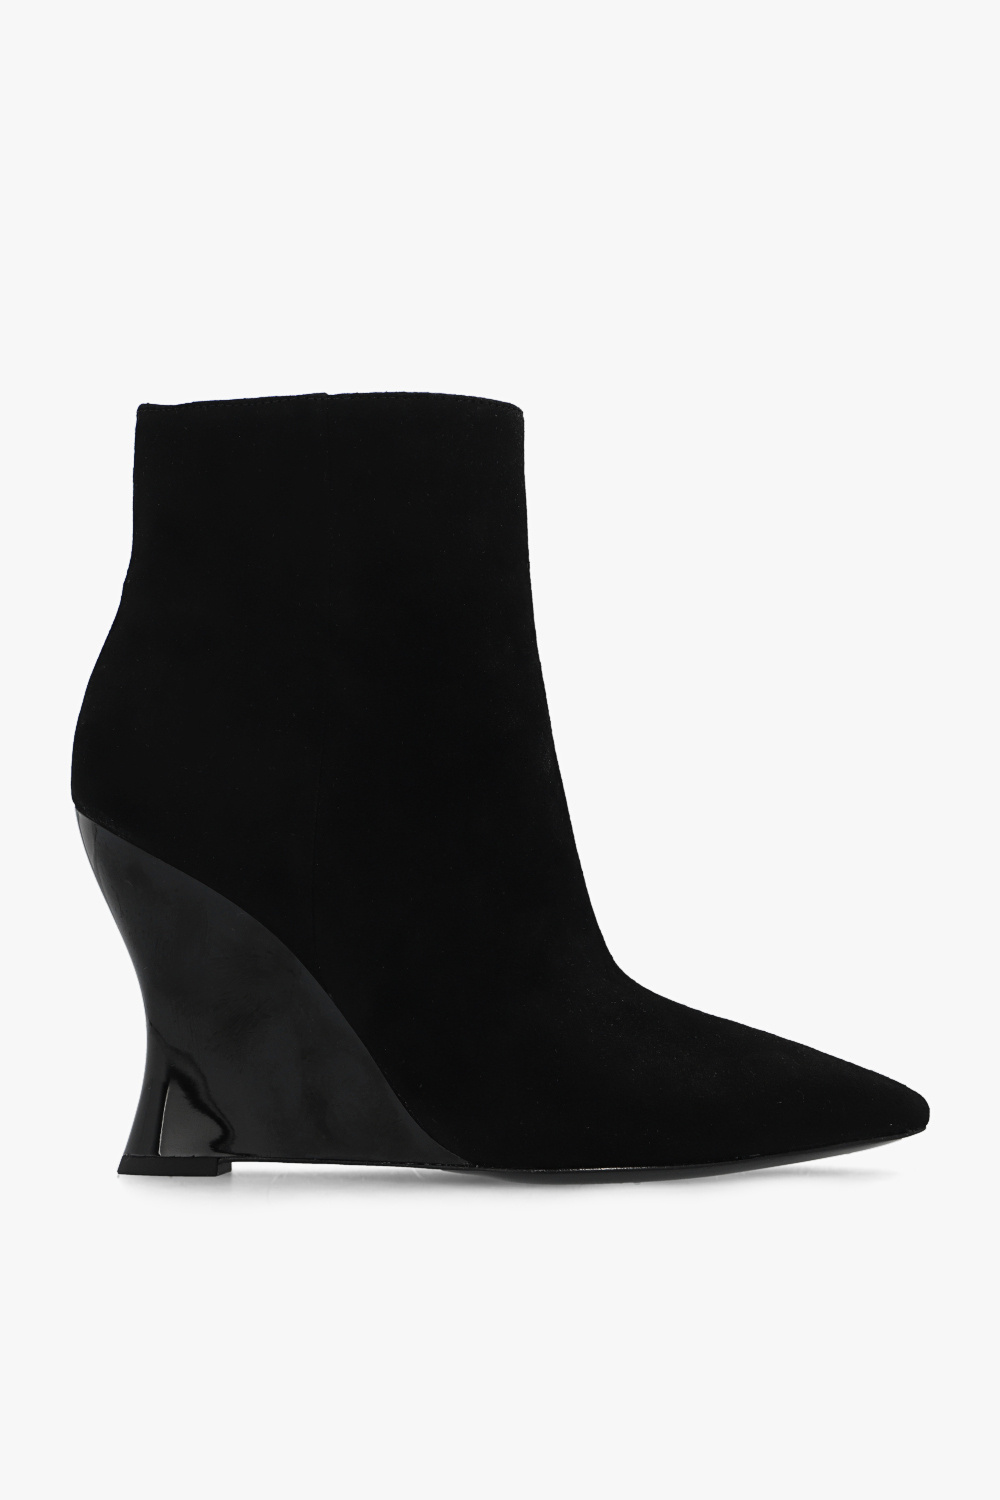 Black Suede wedge boots Tory Burch - Vitkac TW